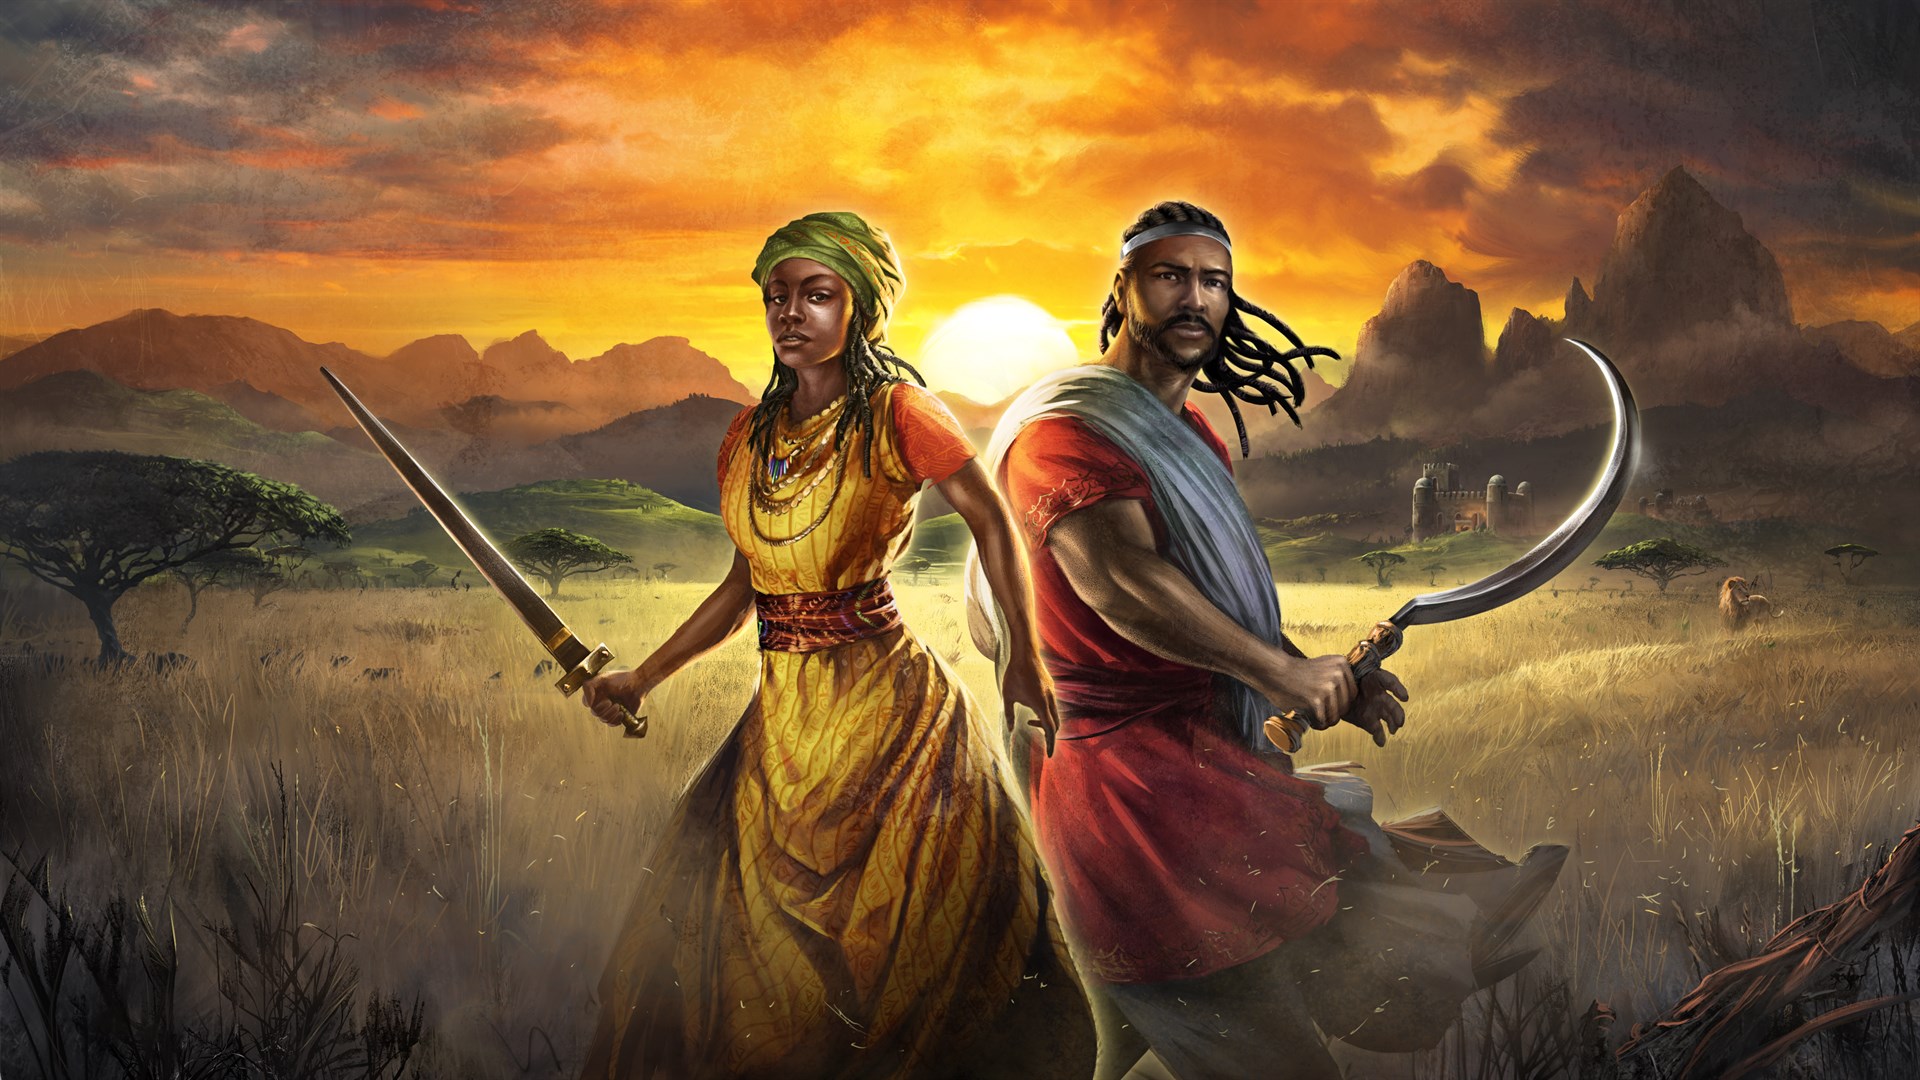 free download age of empires 3 african royals